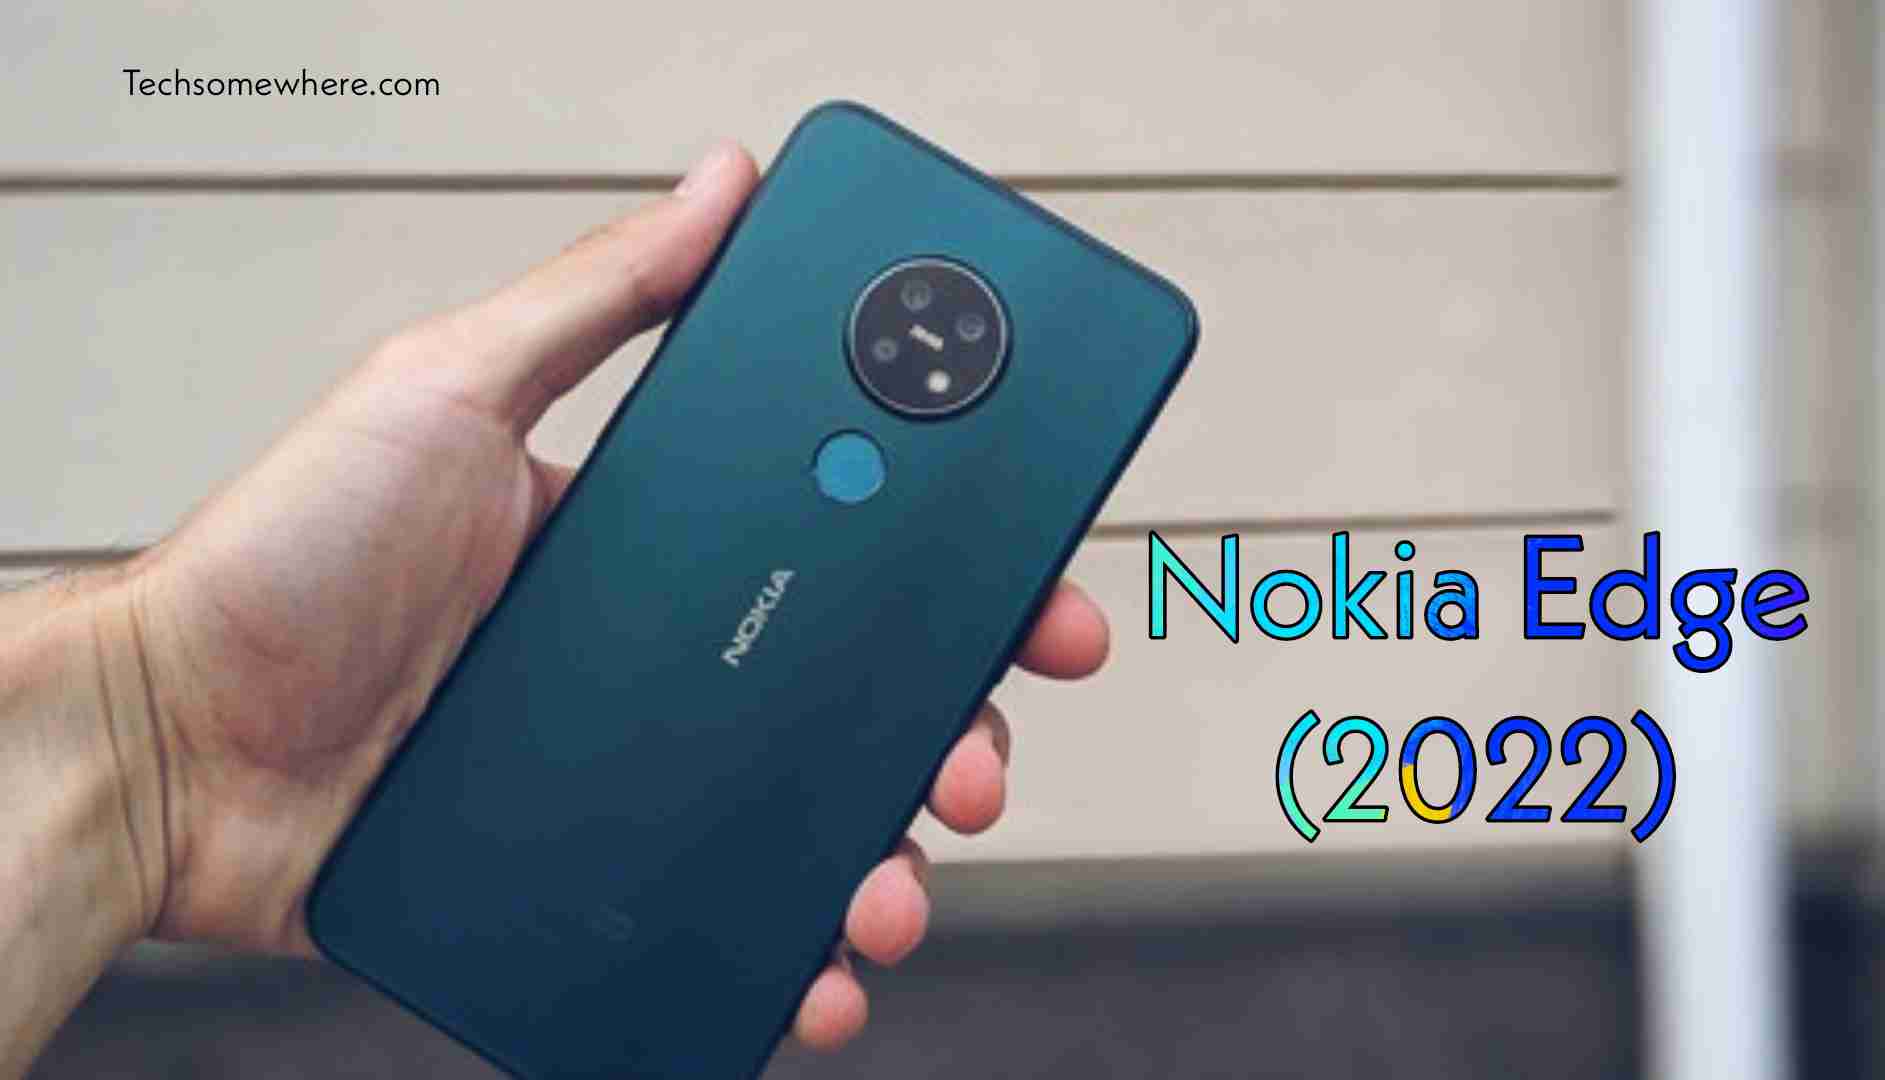 Nokia Edge 2022 Price, Full Specifications with Release Date News & Review